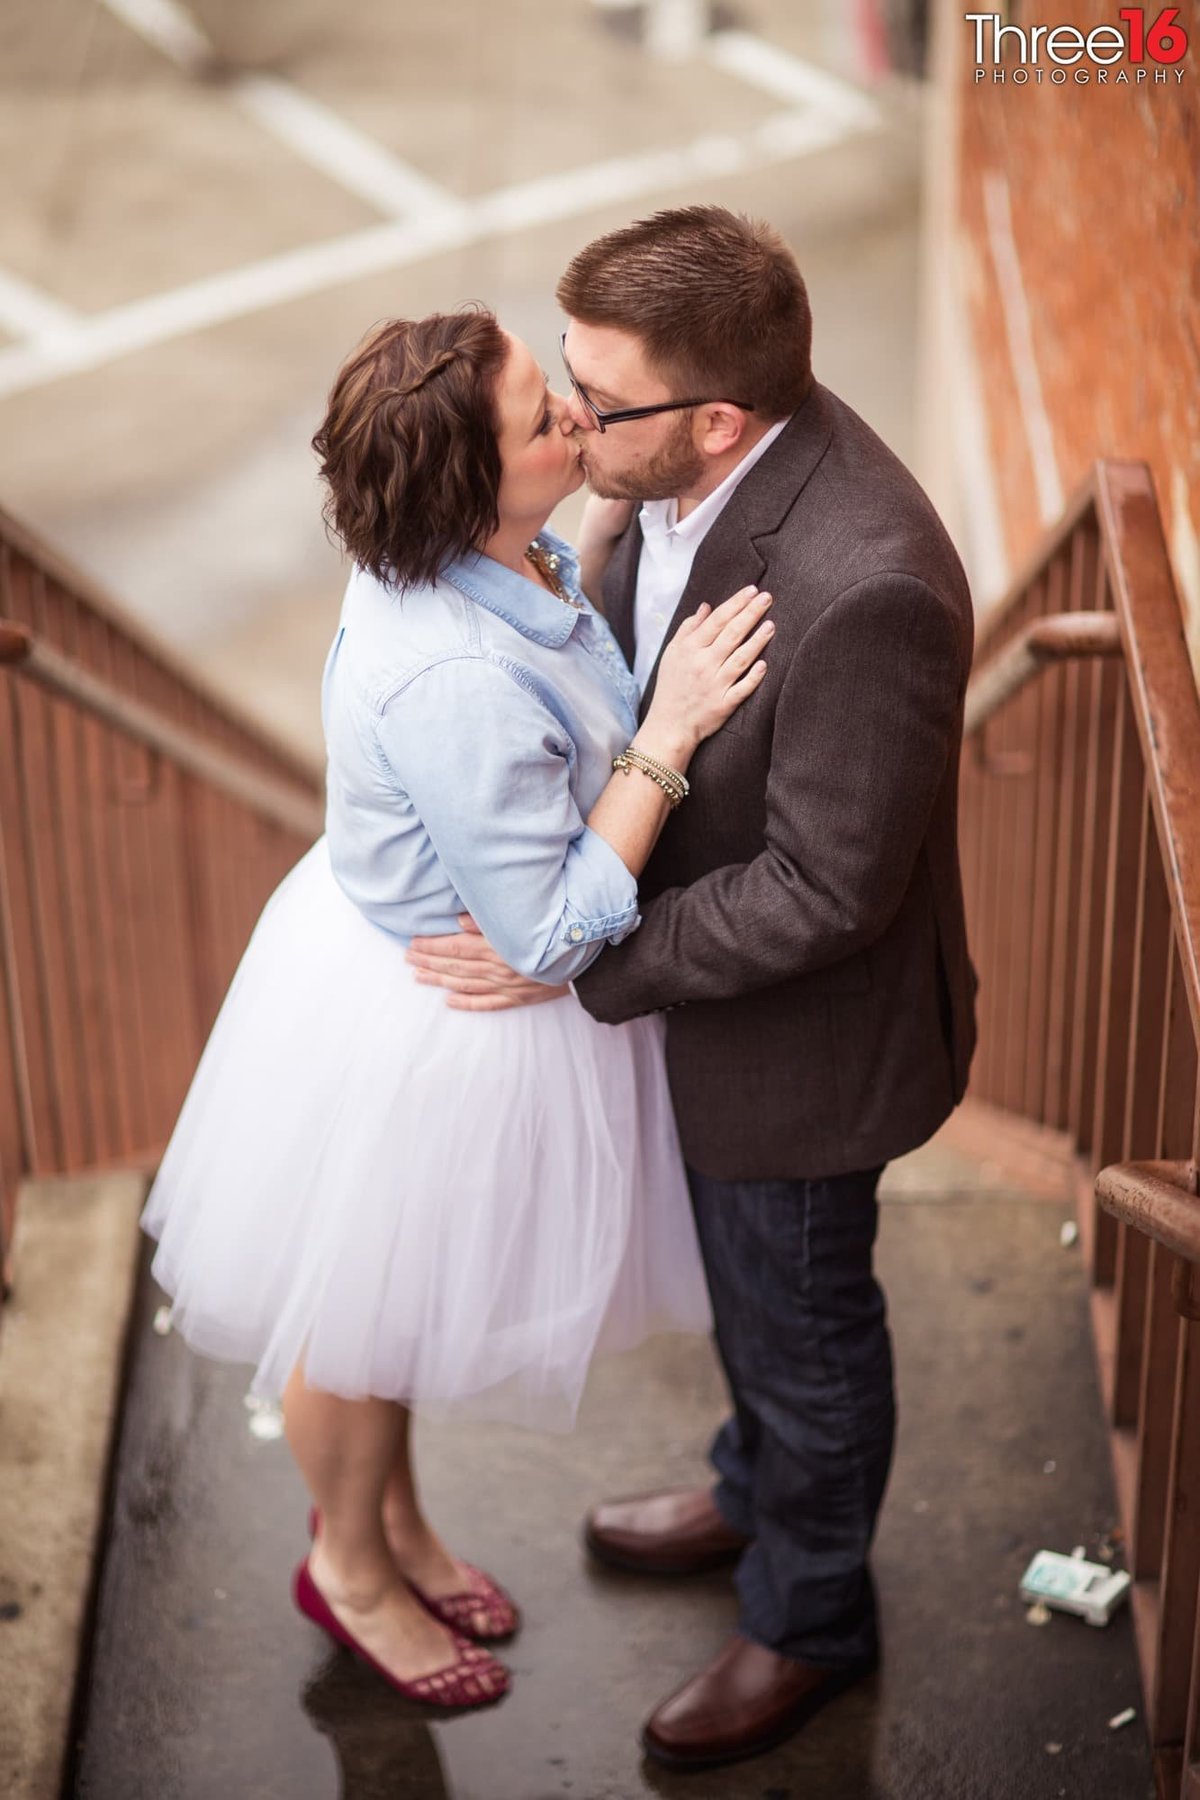 Engaged couple share a kiss on the stairwell of outdoor staircase